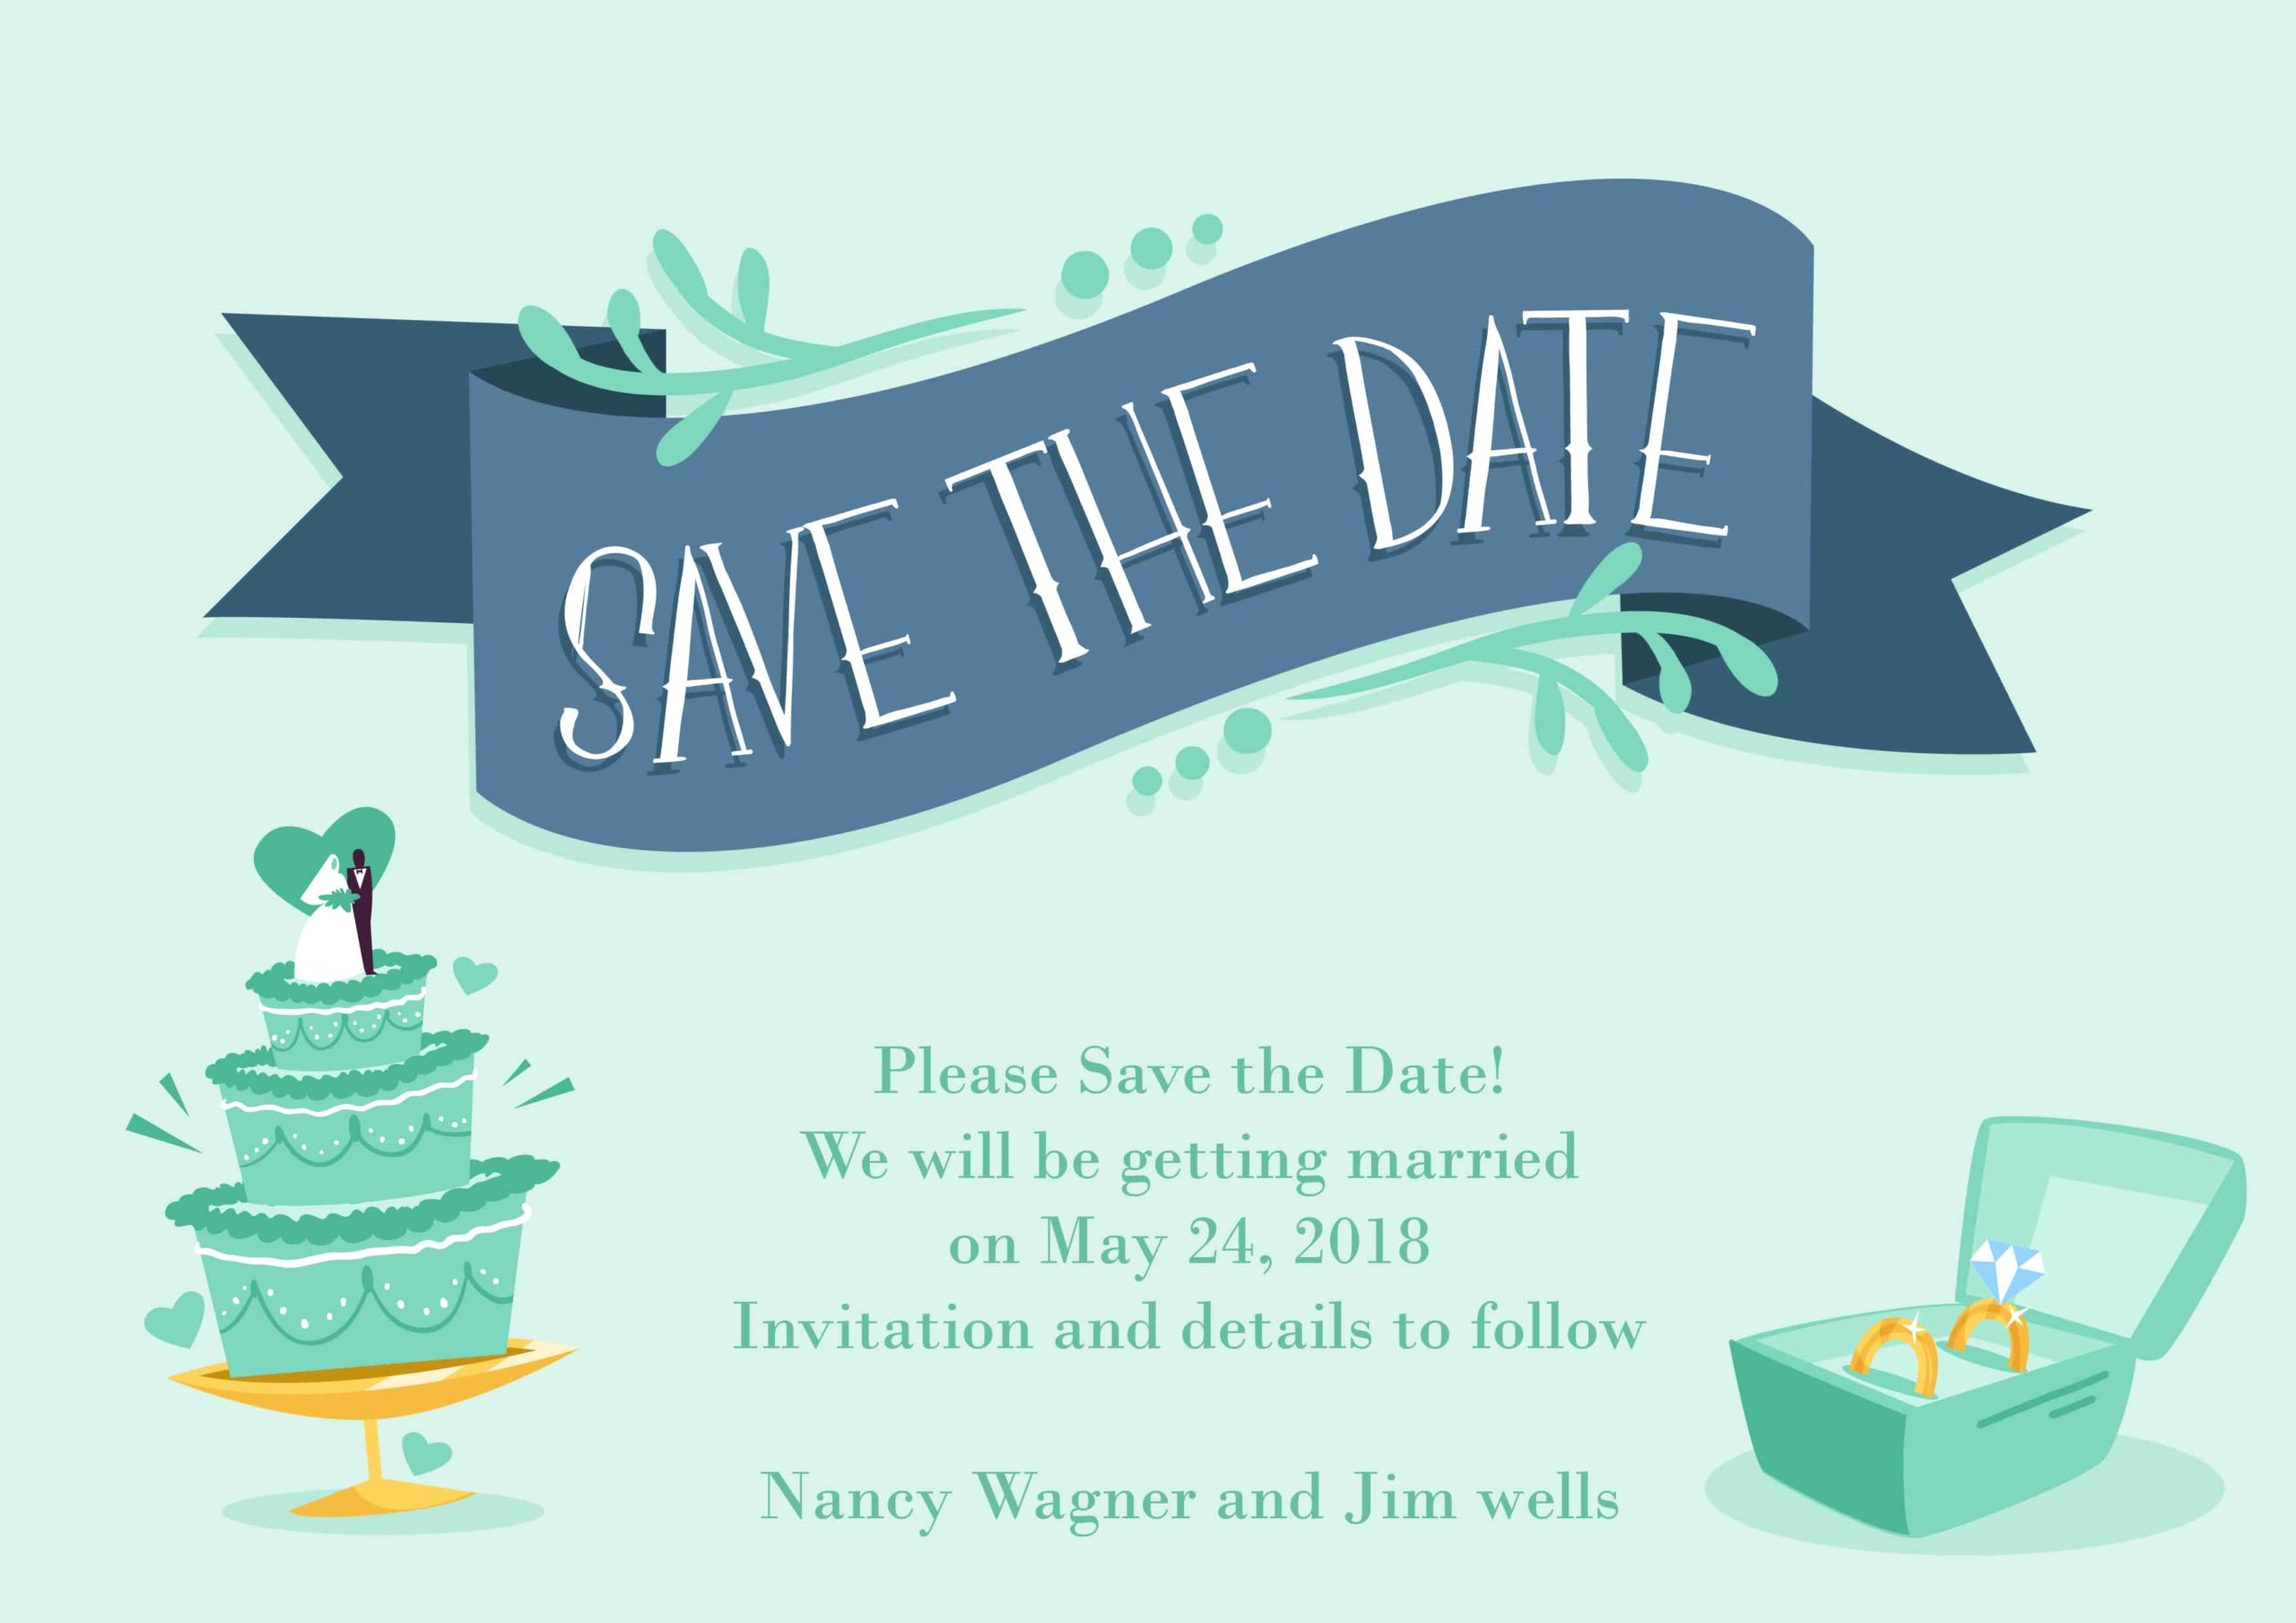 Buy Date Vector Image Save The Date Vector Image Invitation Template